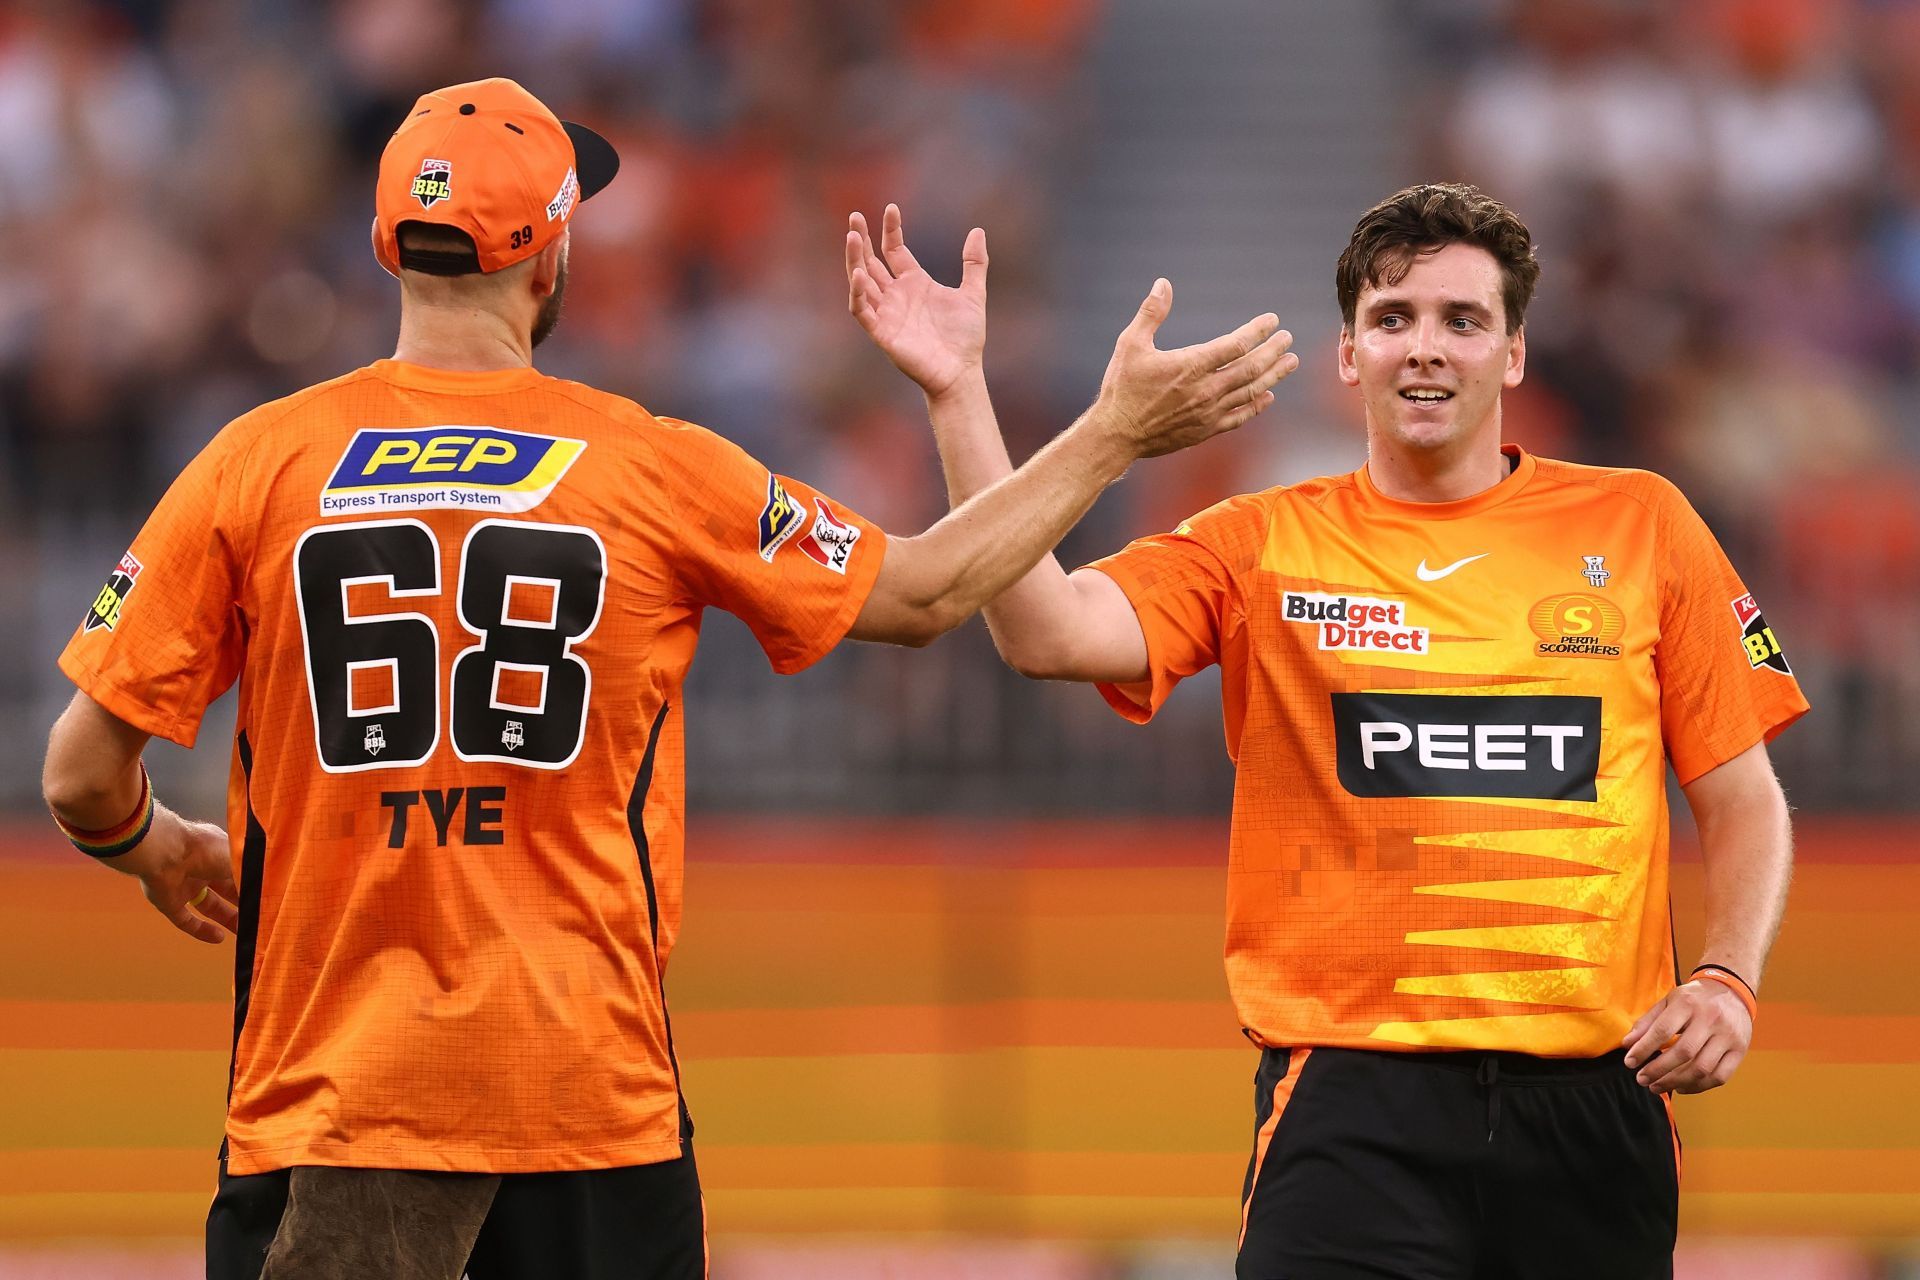 BBL - Perth Scorchers v Sydney Sixers [Pic Credit: Getty Images]